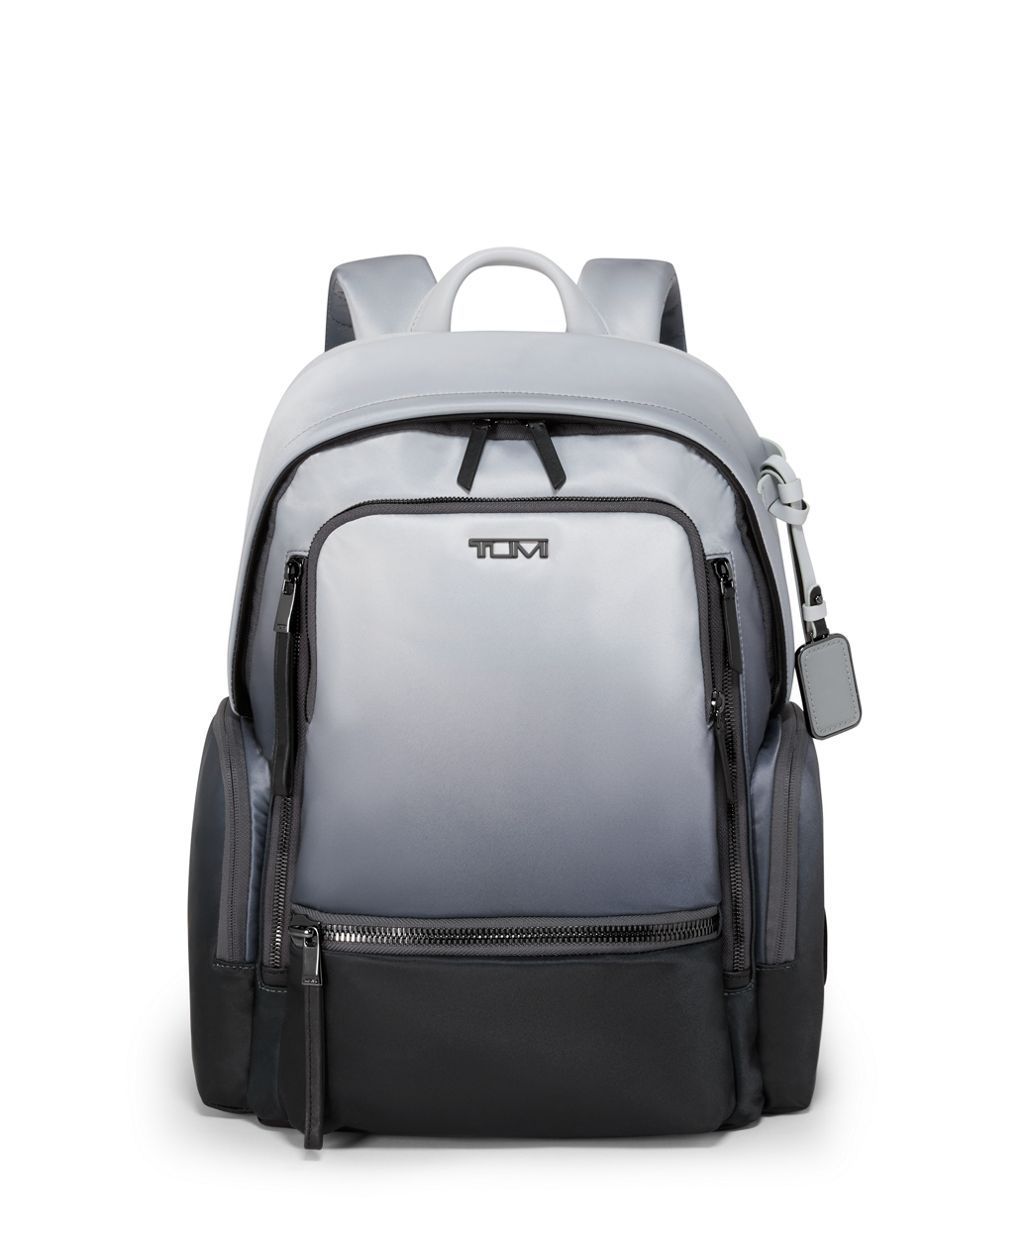 The 21 Best Laptop Bags Designers and Commuters Agree On